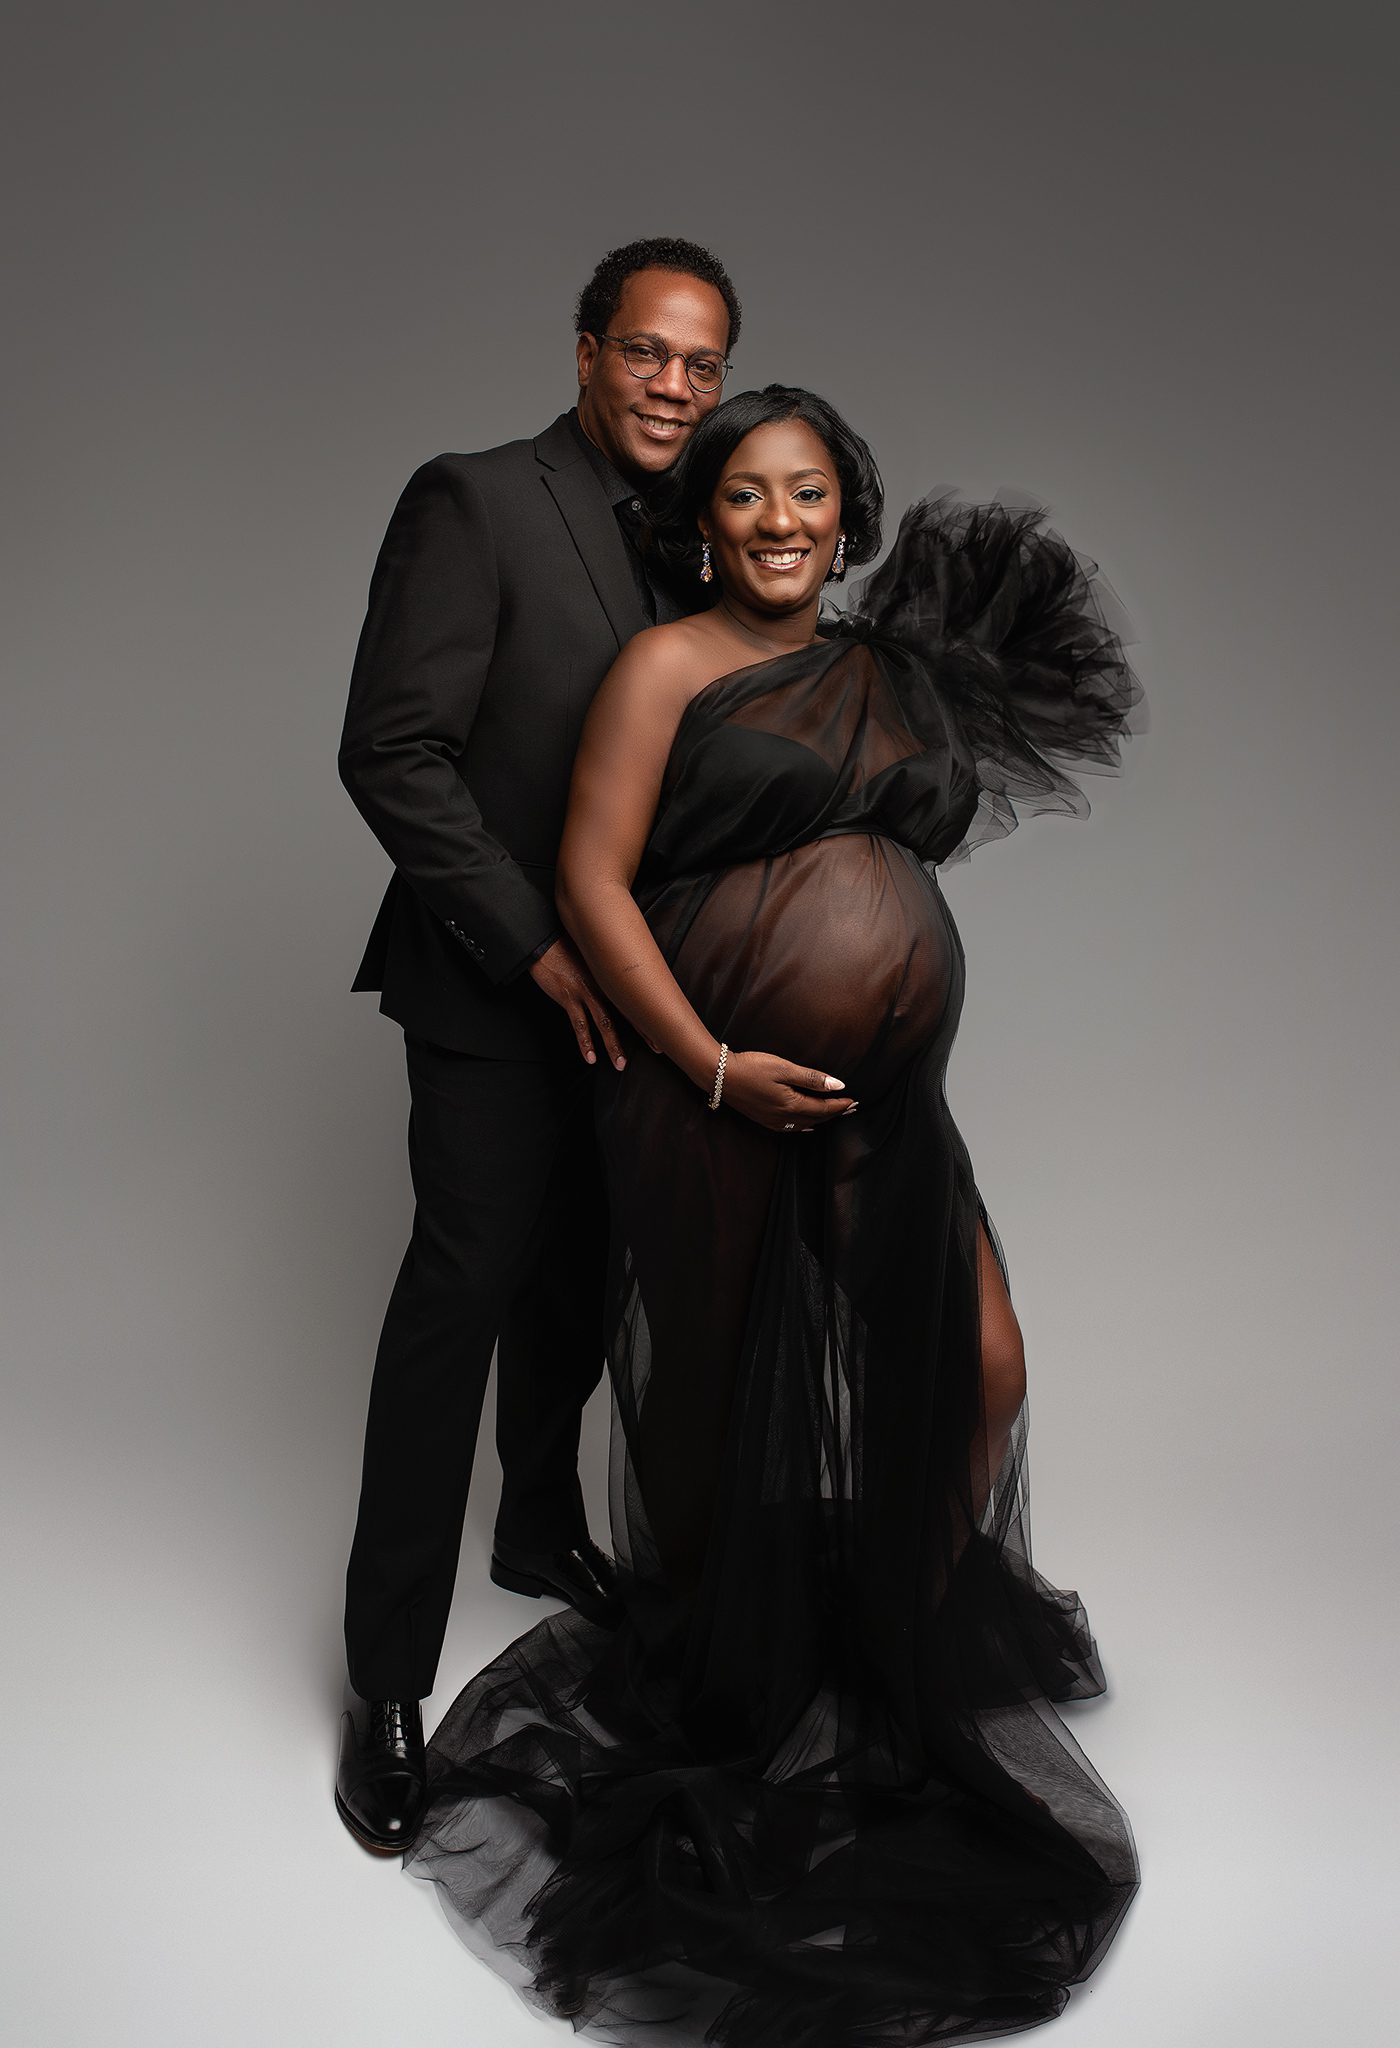 parents to be photographed in atlanta portrait studio to document their pregnancy. Dress provided by photographer in atlanta, simple maternity portraits, maternity photoshoot with couples